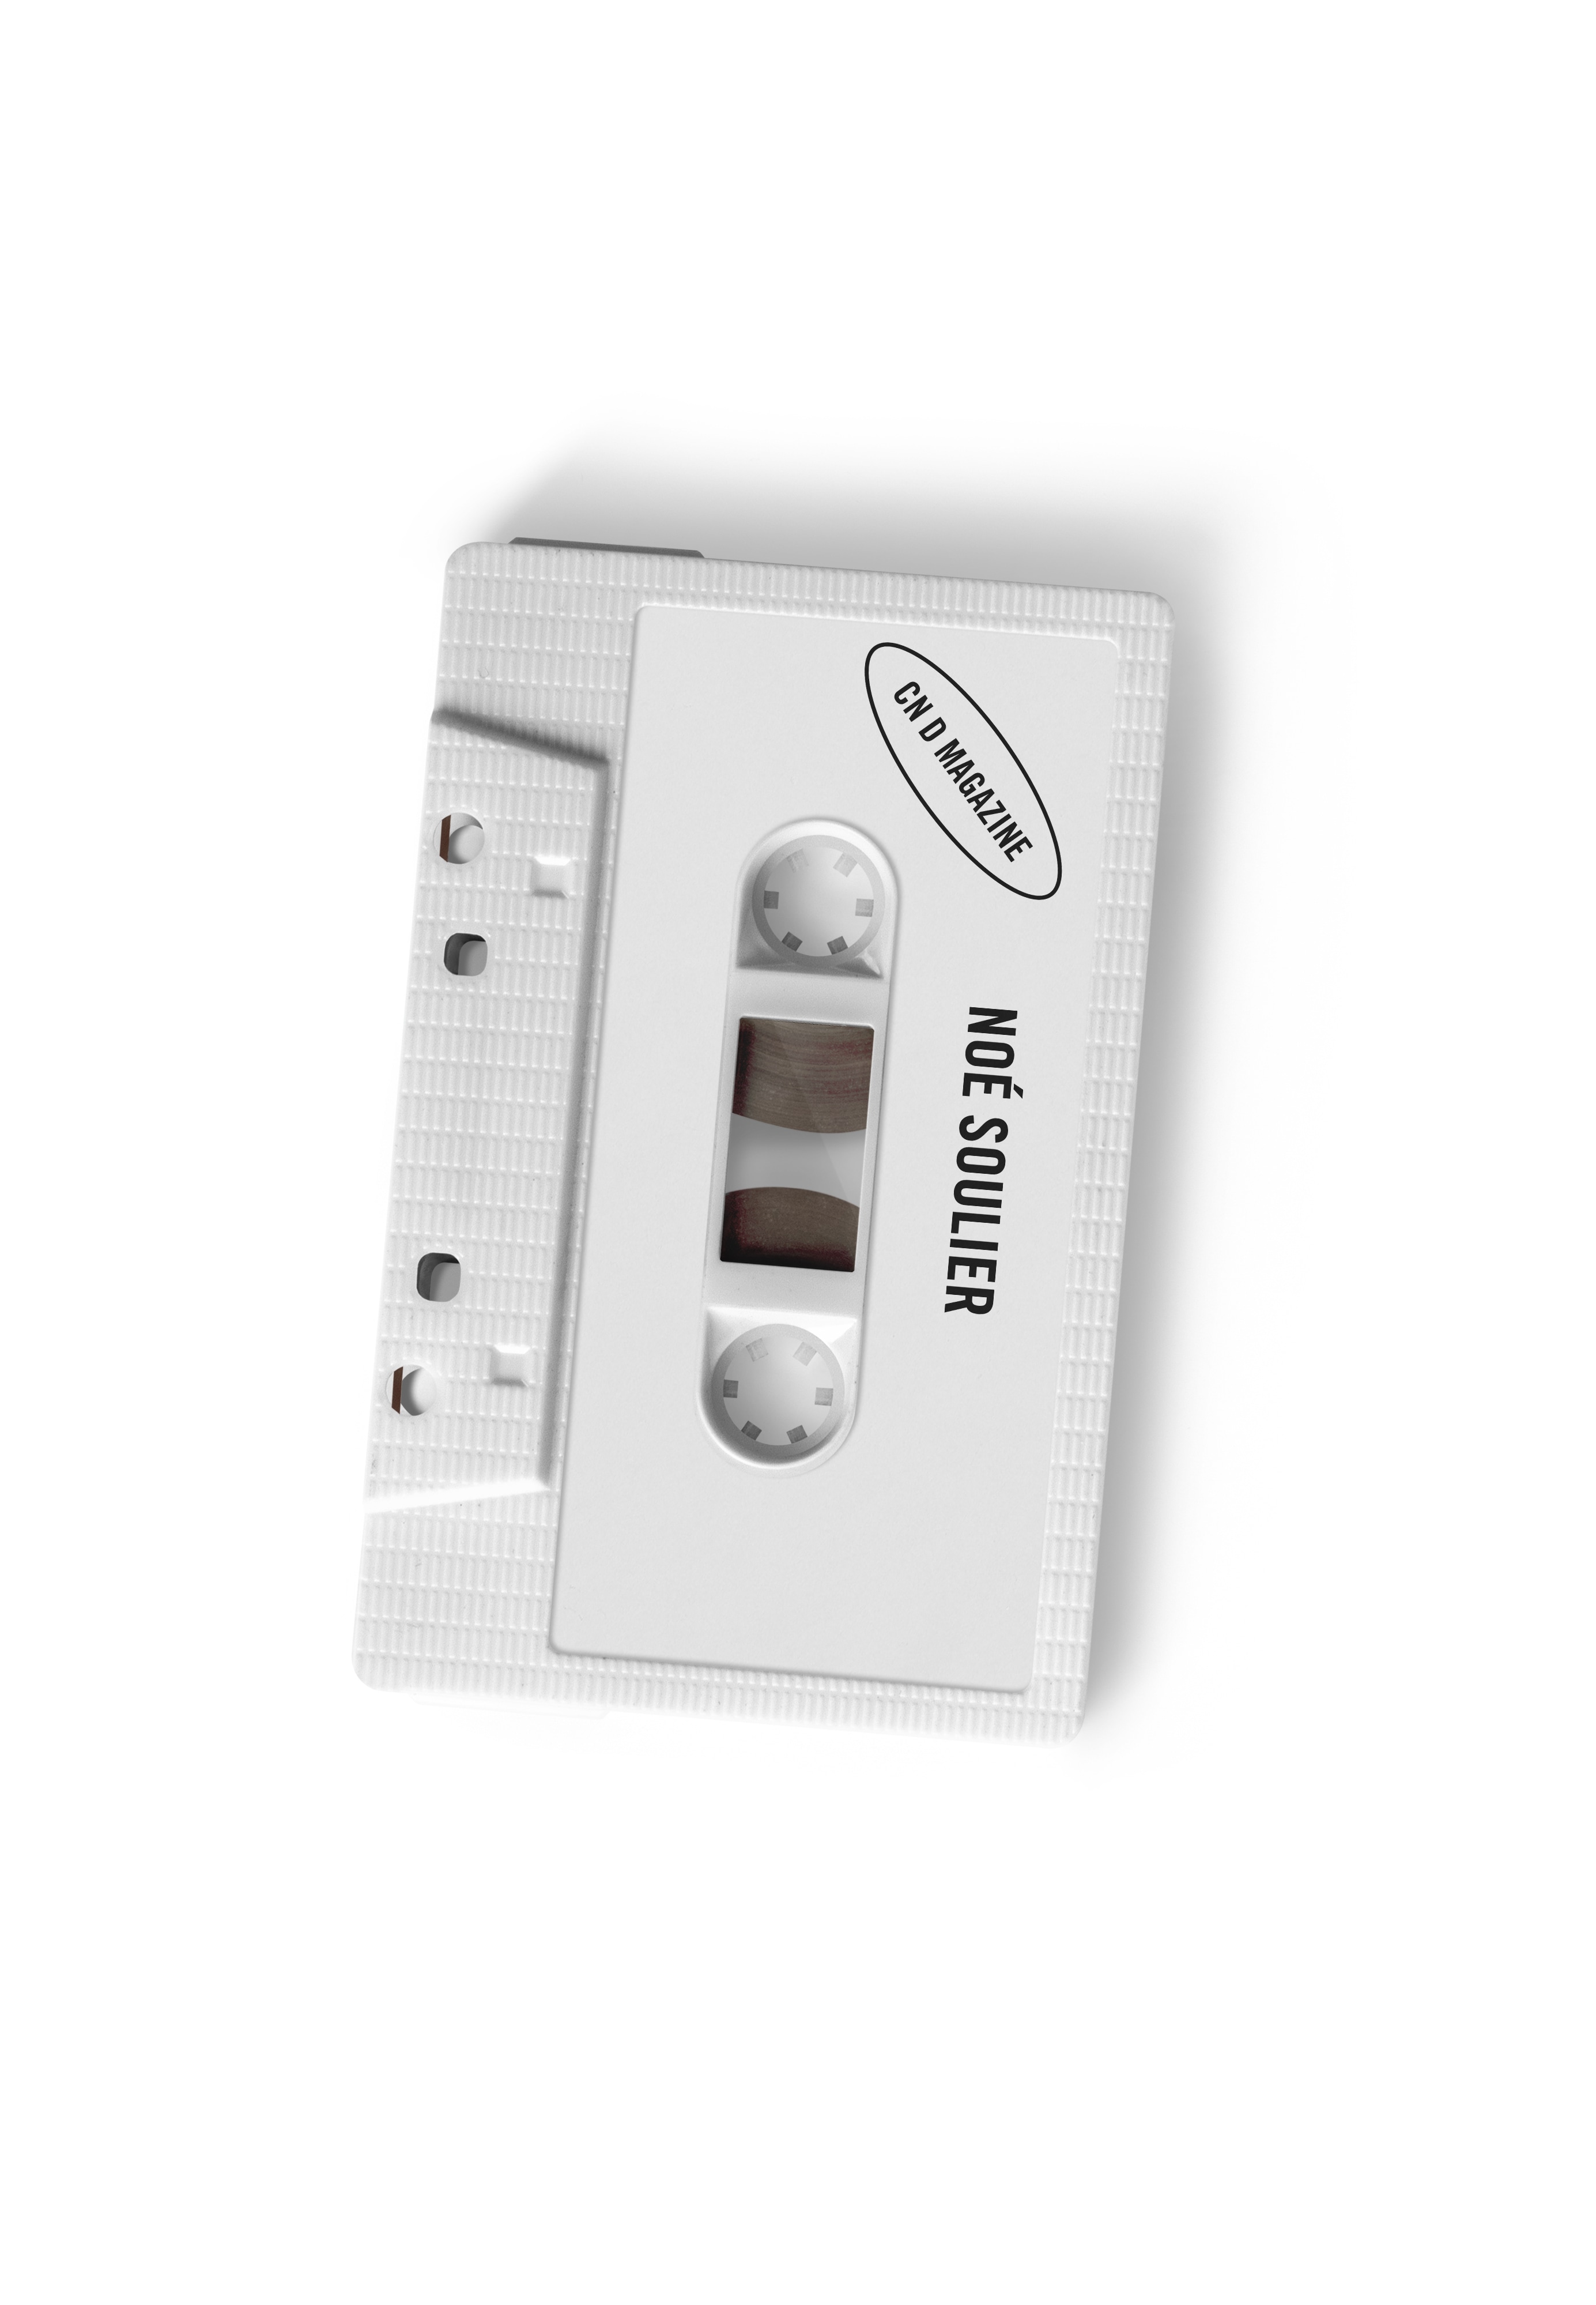 A white audio cassette with the name Noé Soulier